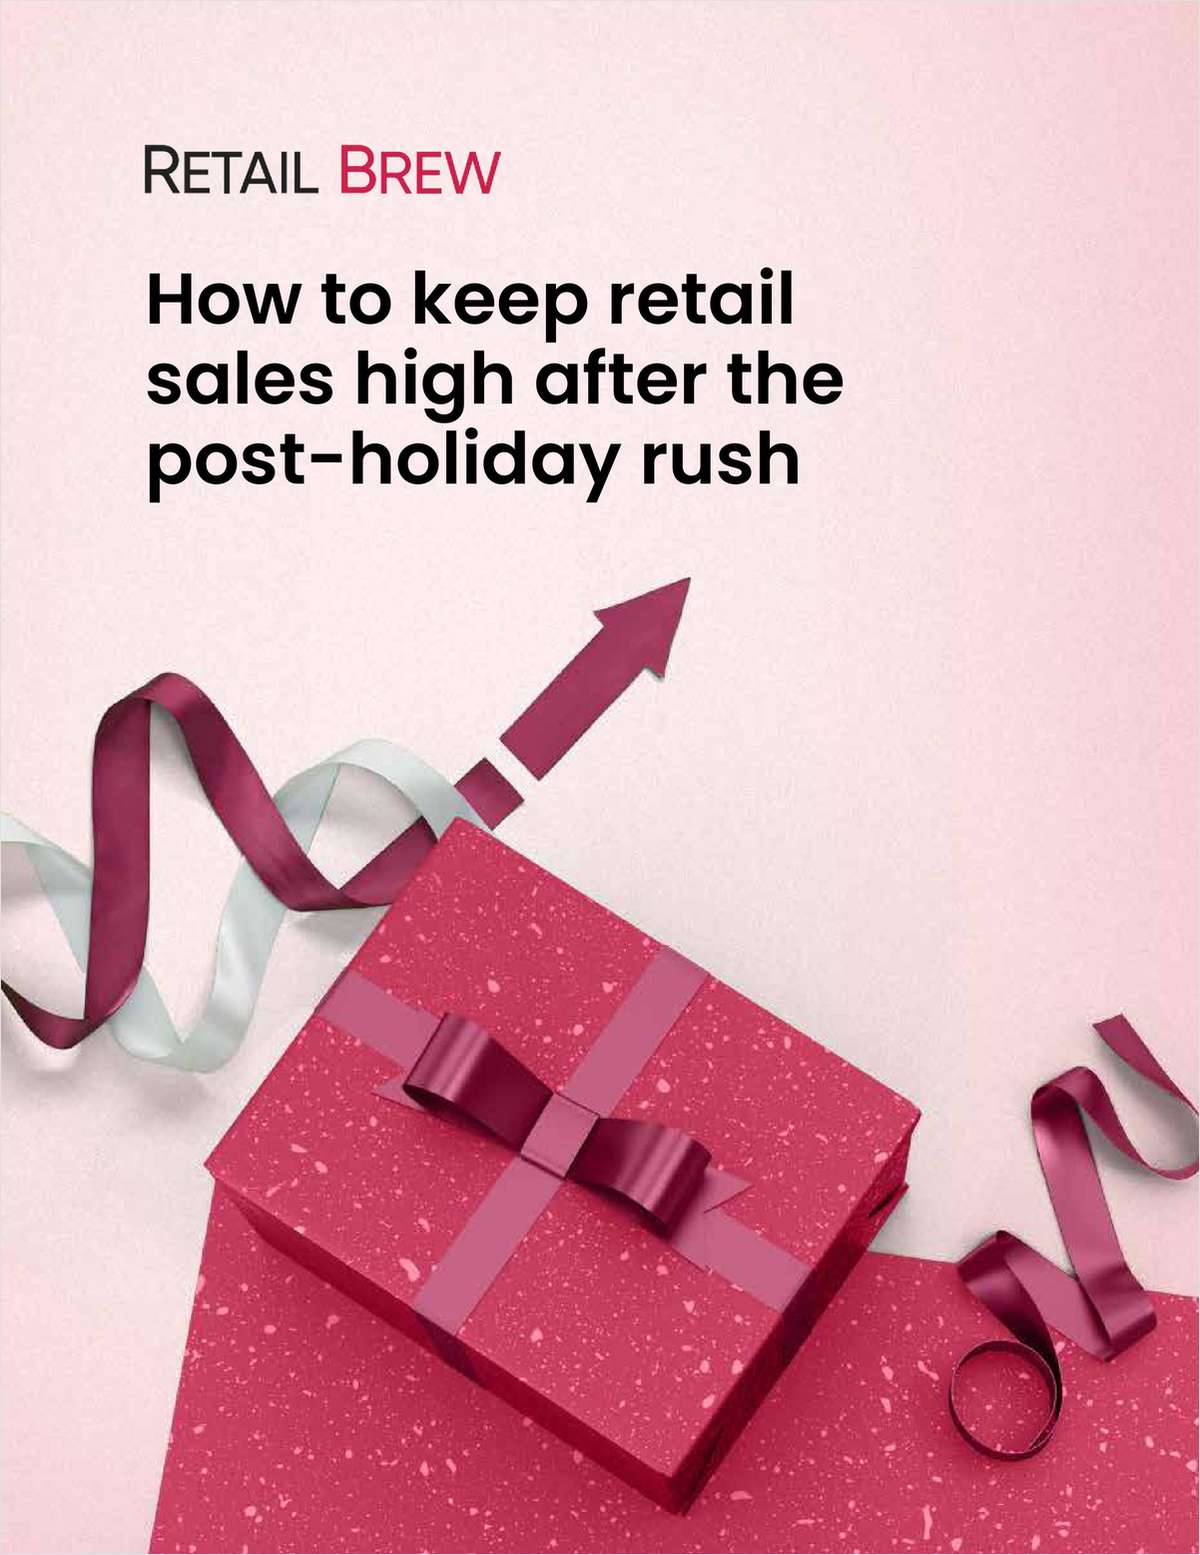 How to Keep Retail Sales High After the Post-Holiday Rush